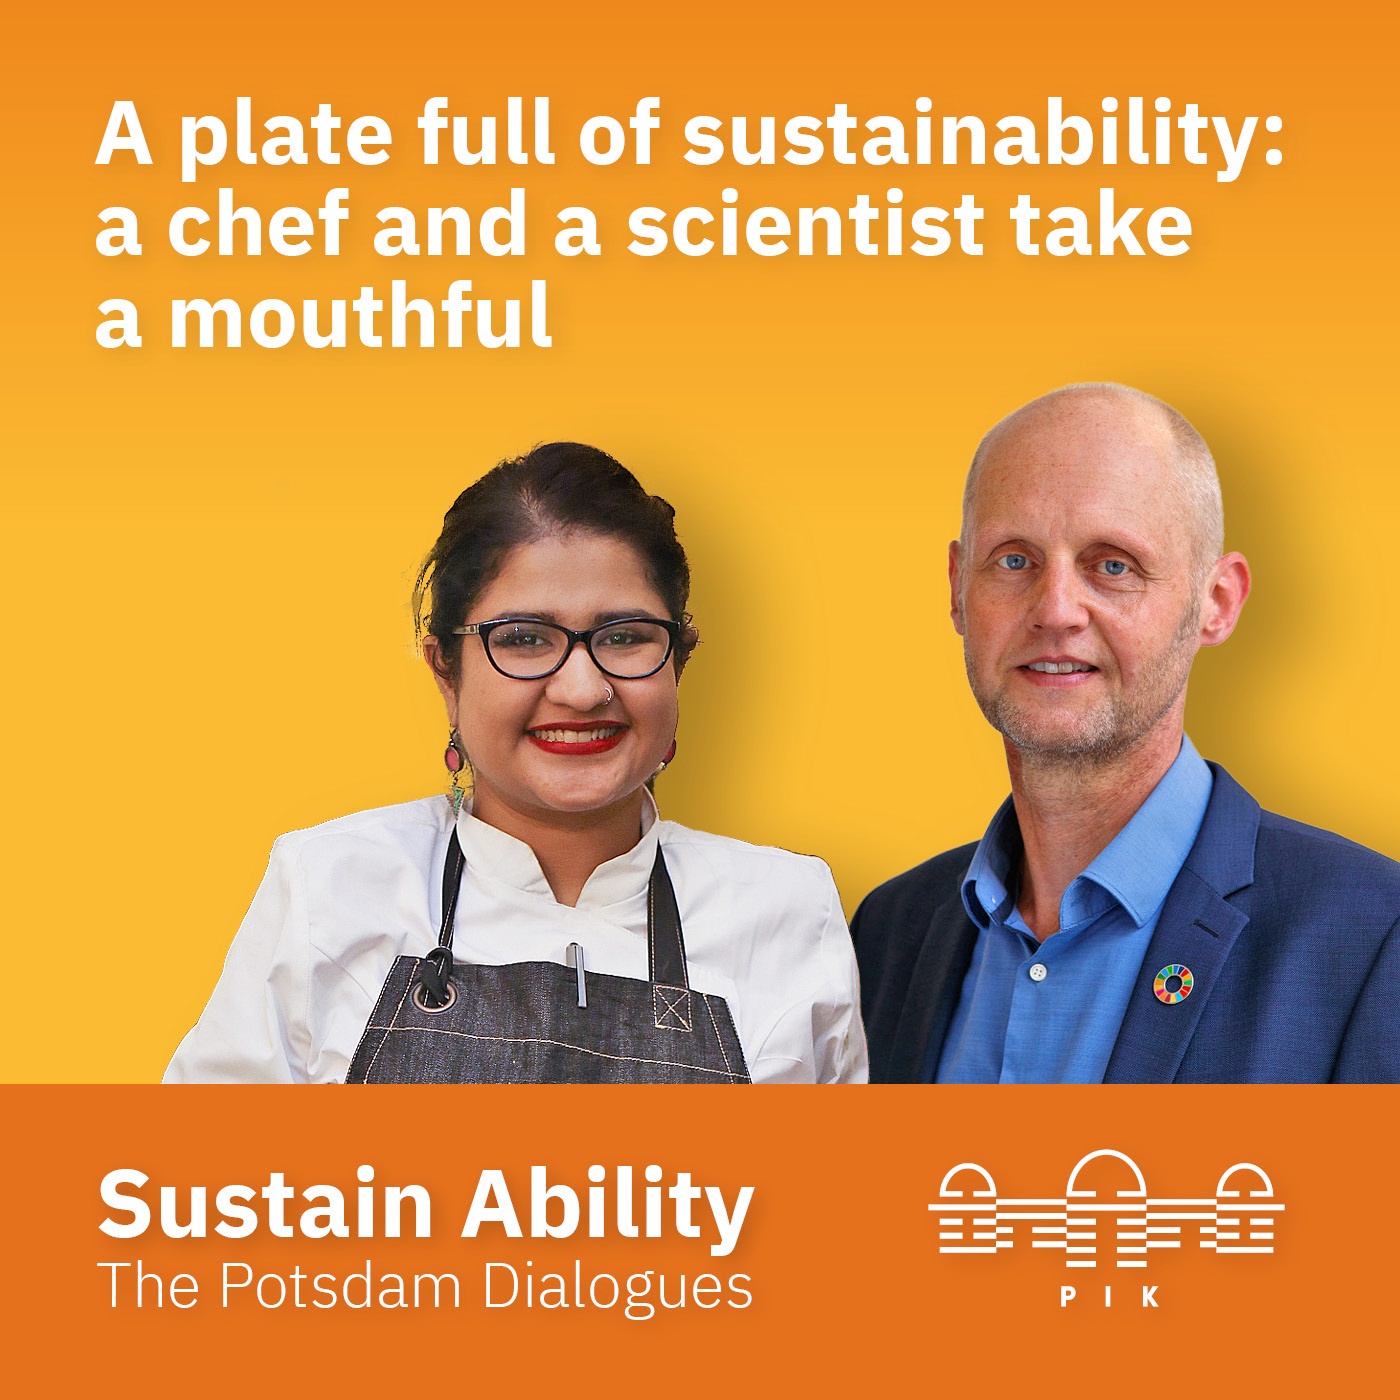 A plate full of sustainability: a chef and a scientist take a mouthful